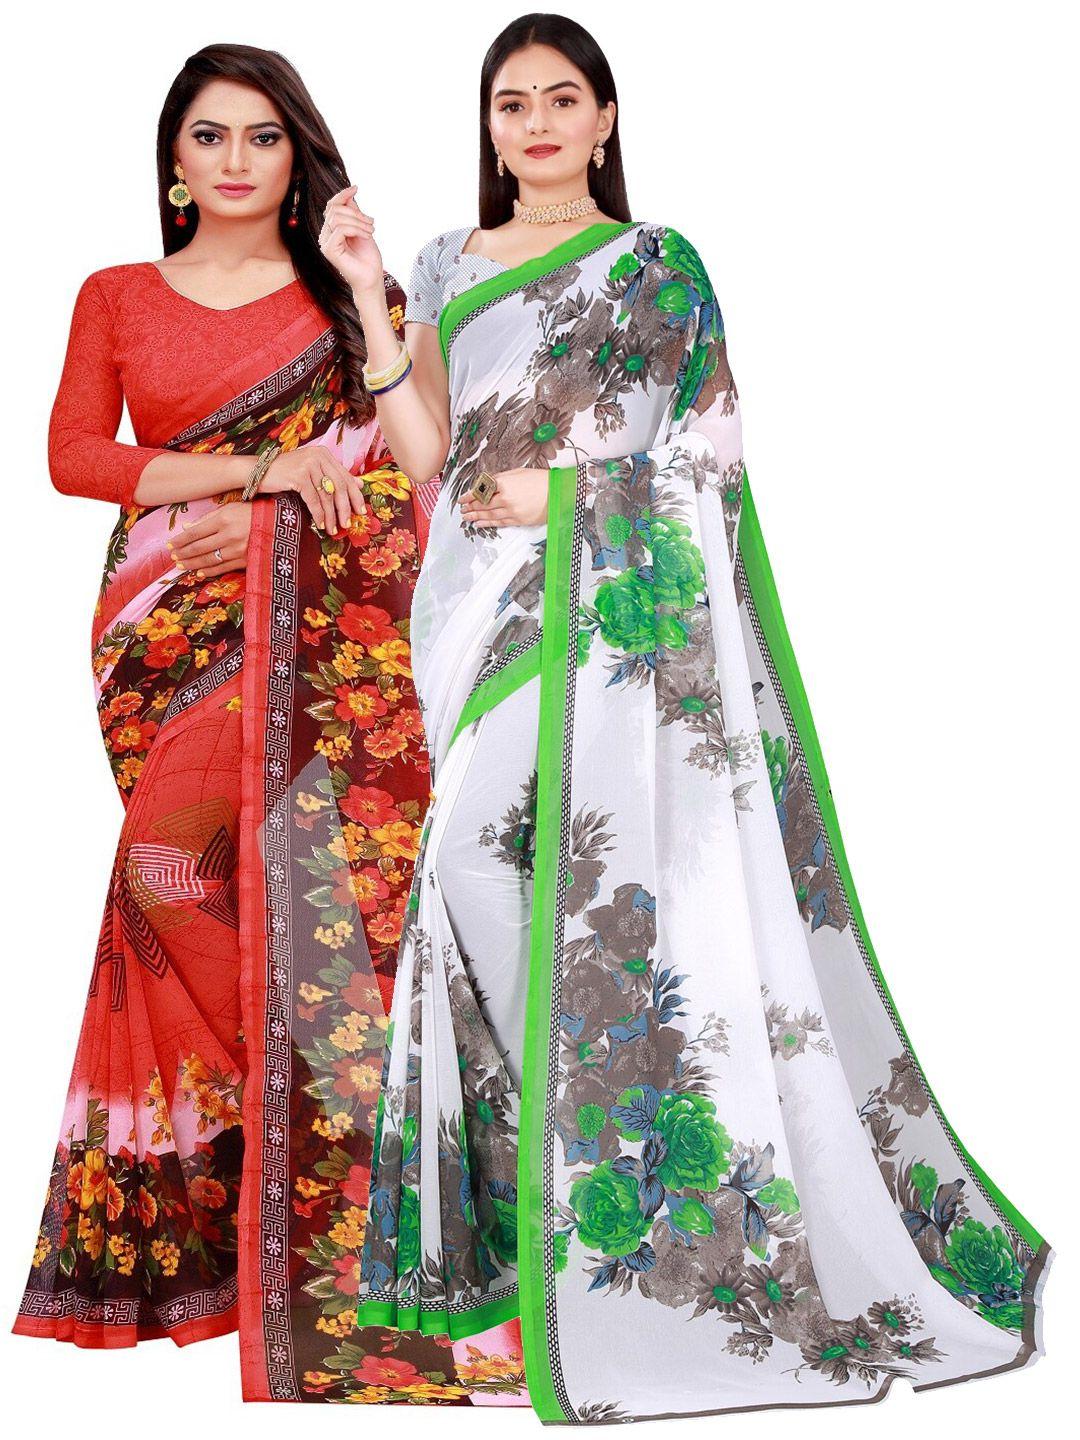 florence-2-white-&-red-pure-georgette-saree